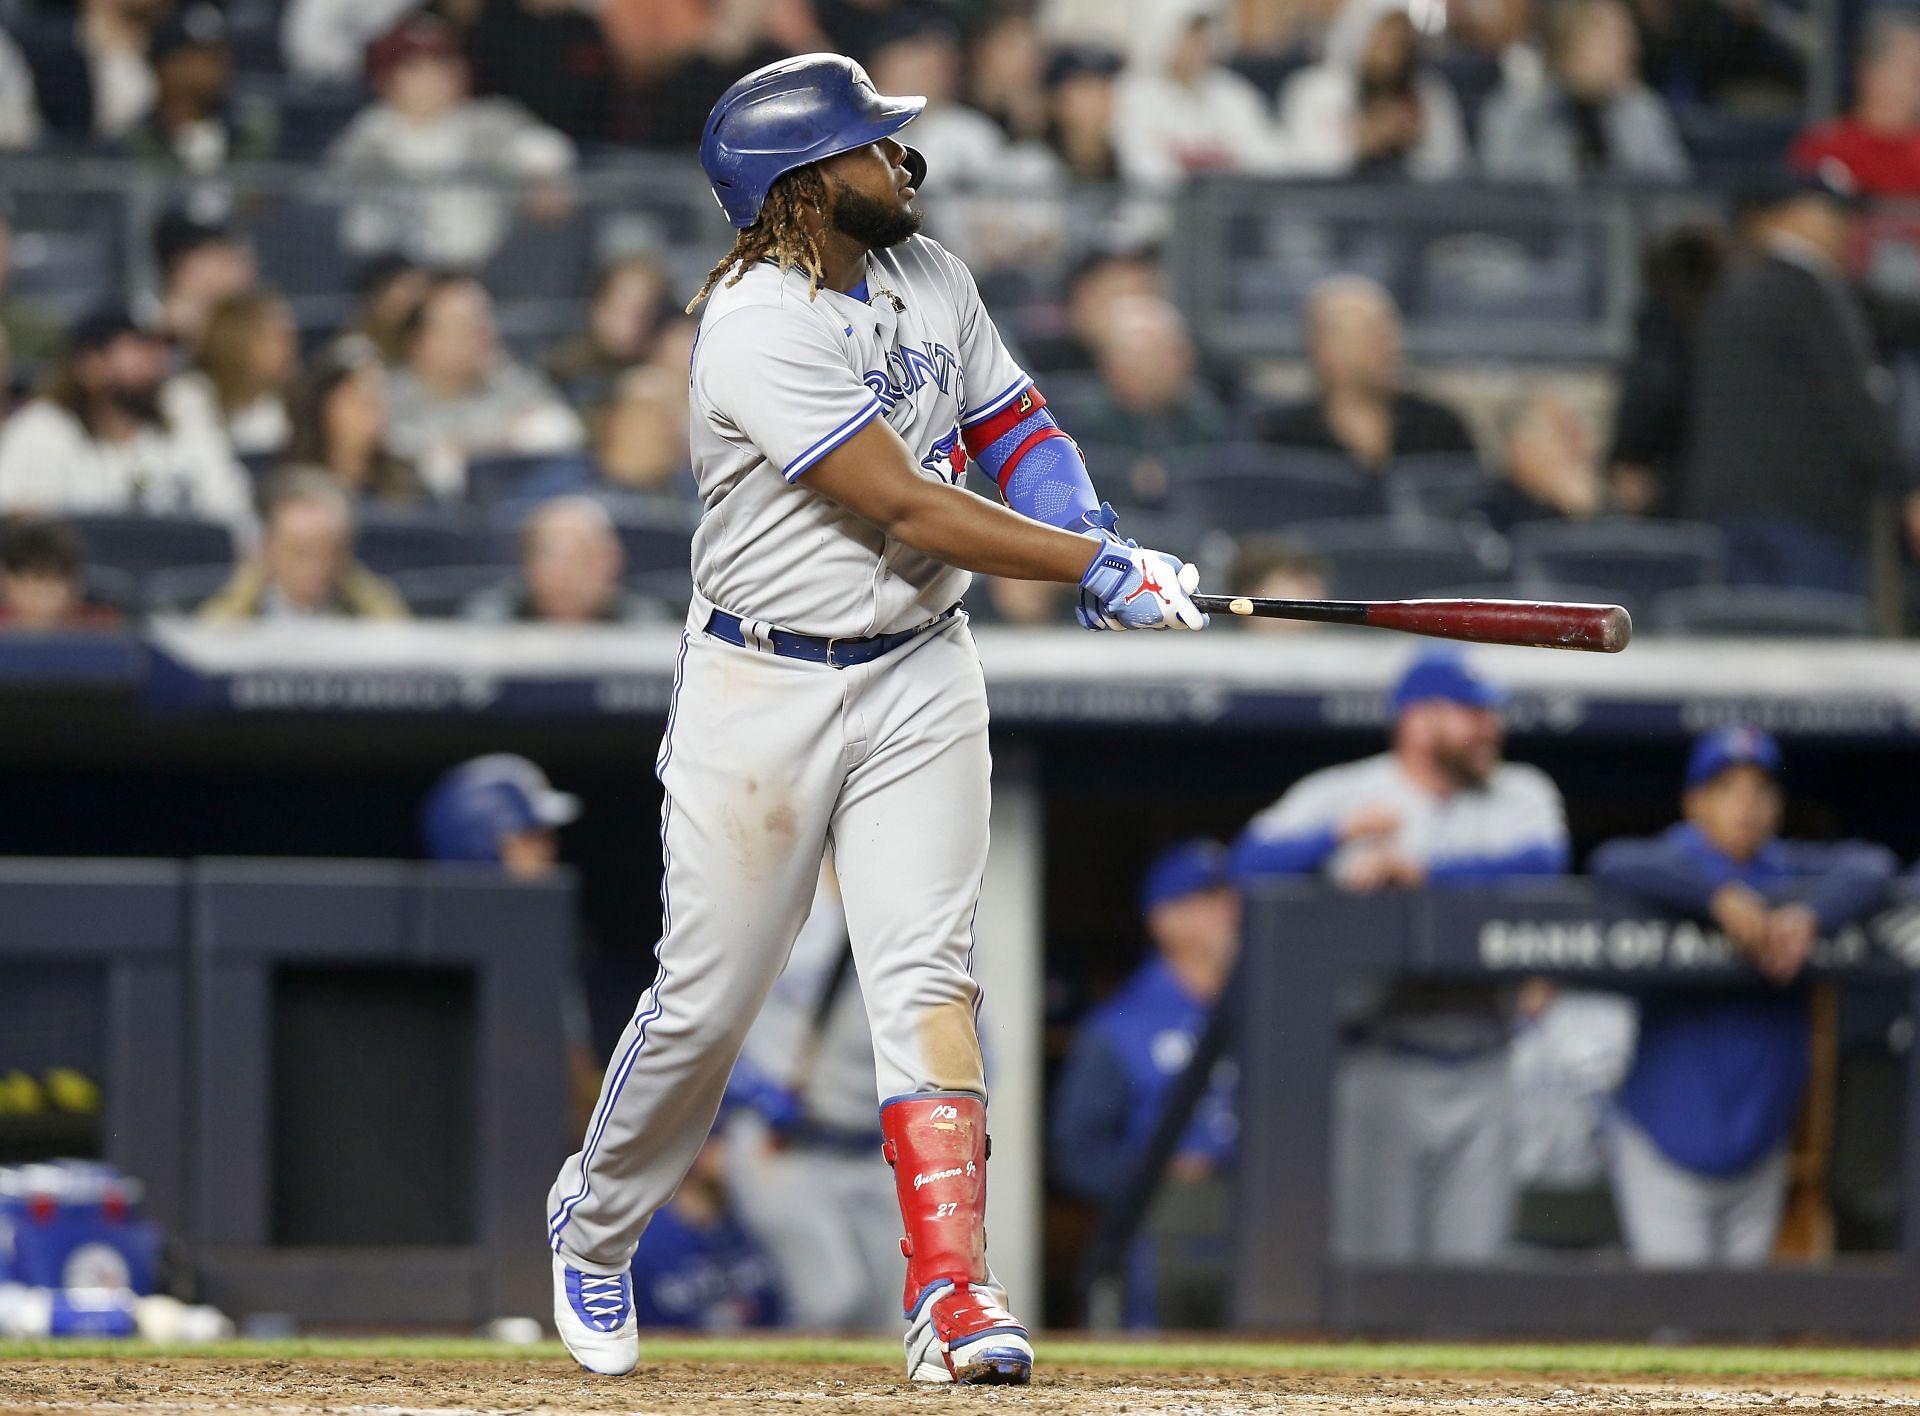 Vladimir Guerrero Jr. watches the flight of his eighth inning home run against the New York Yankees